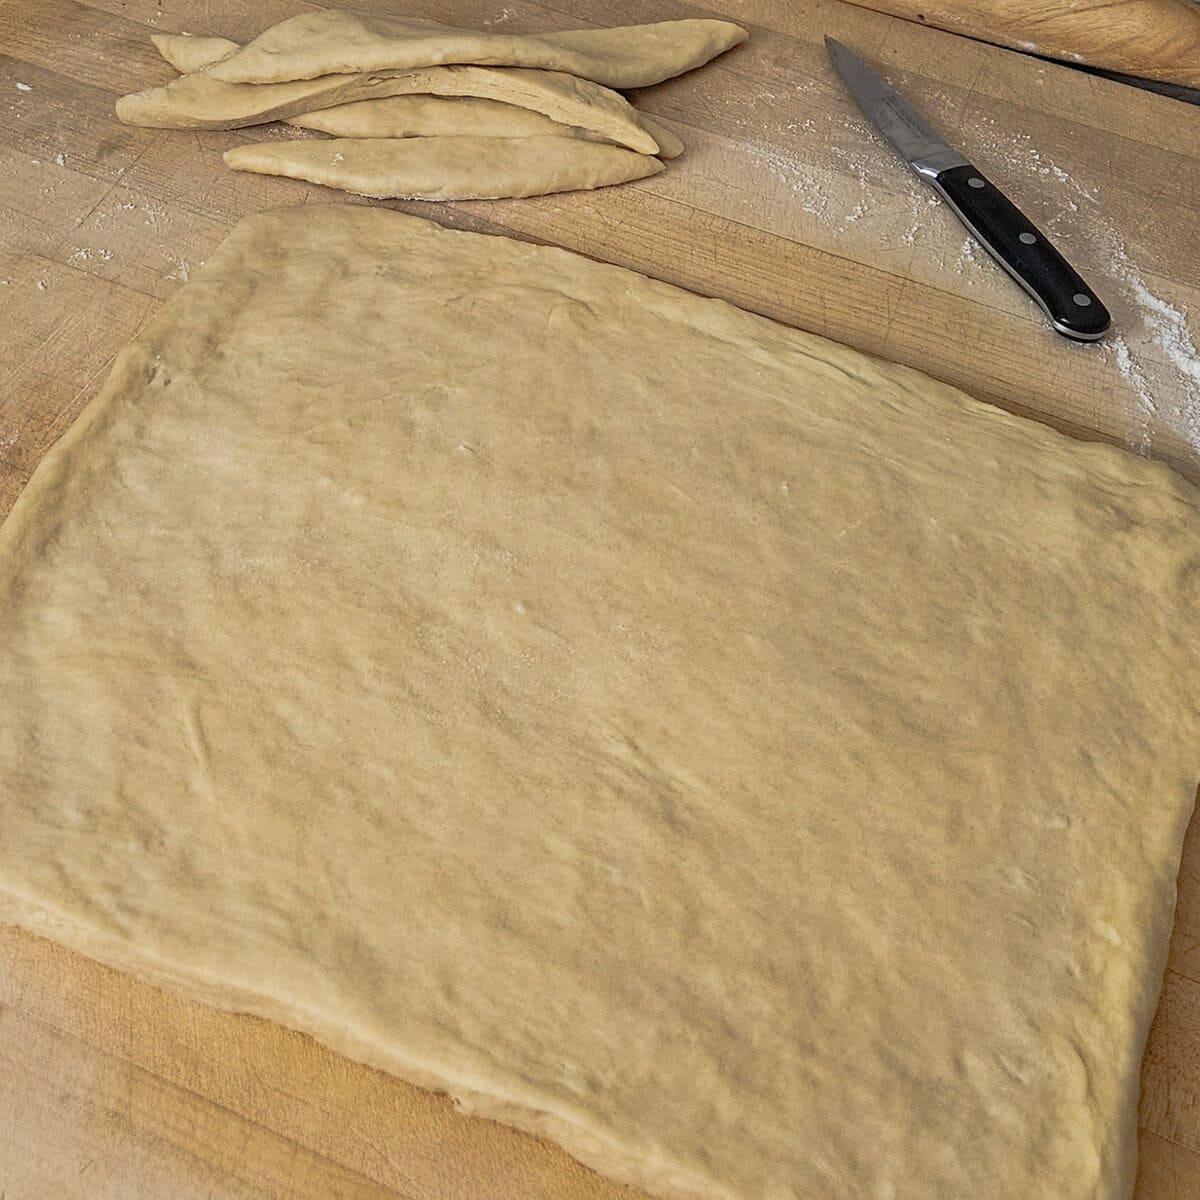 cinnamon roll dough rolled out and trimmed to a square